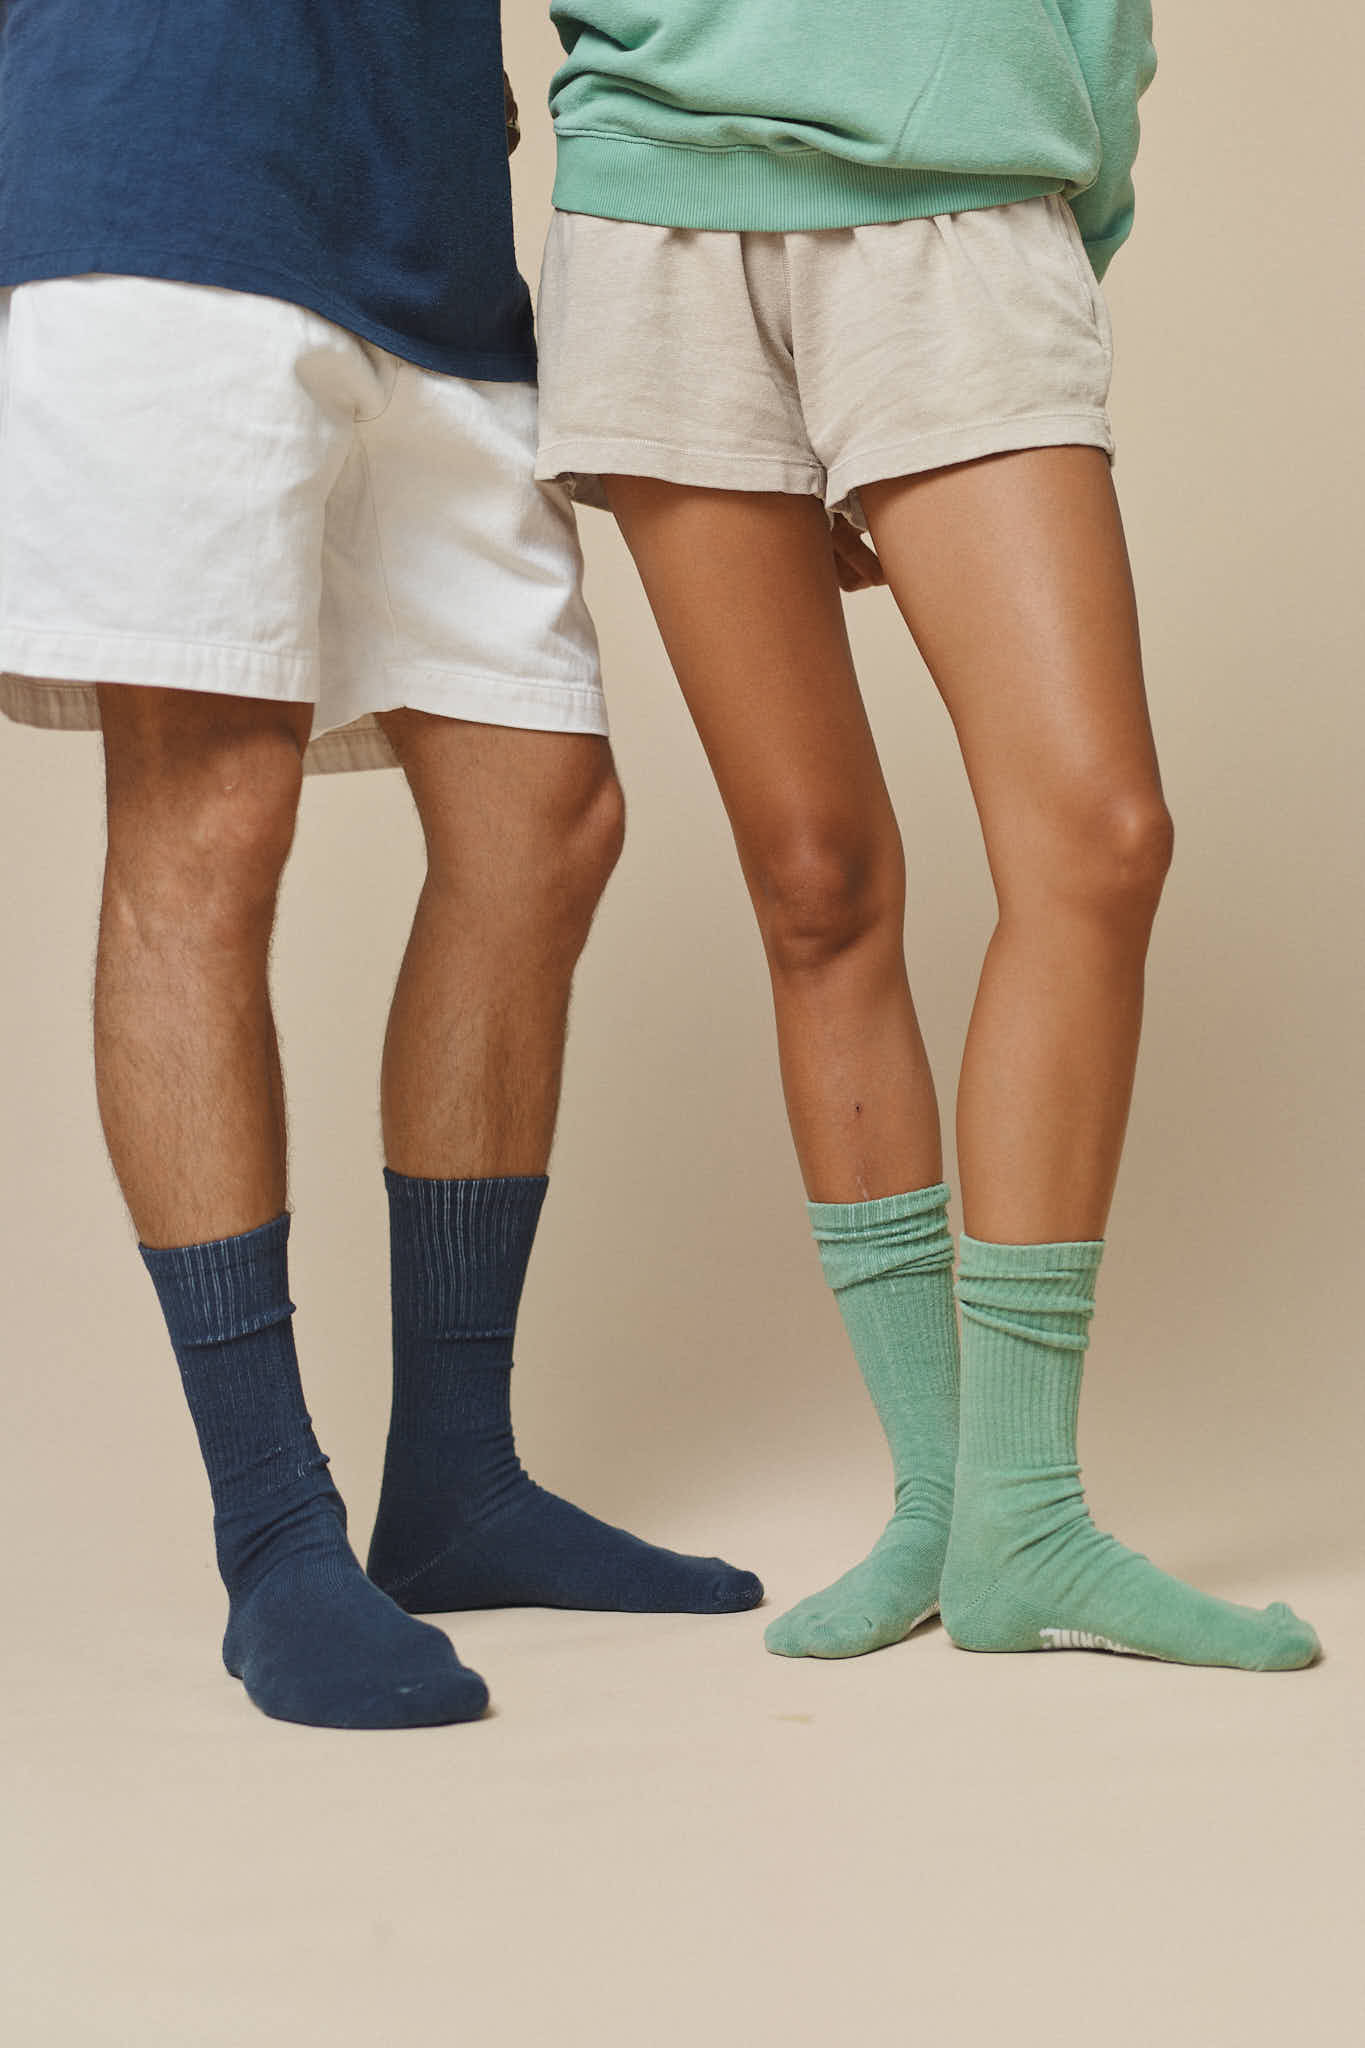 “Funky Feet: Expressing Your Personality with Quirky Socks”